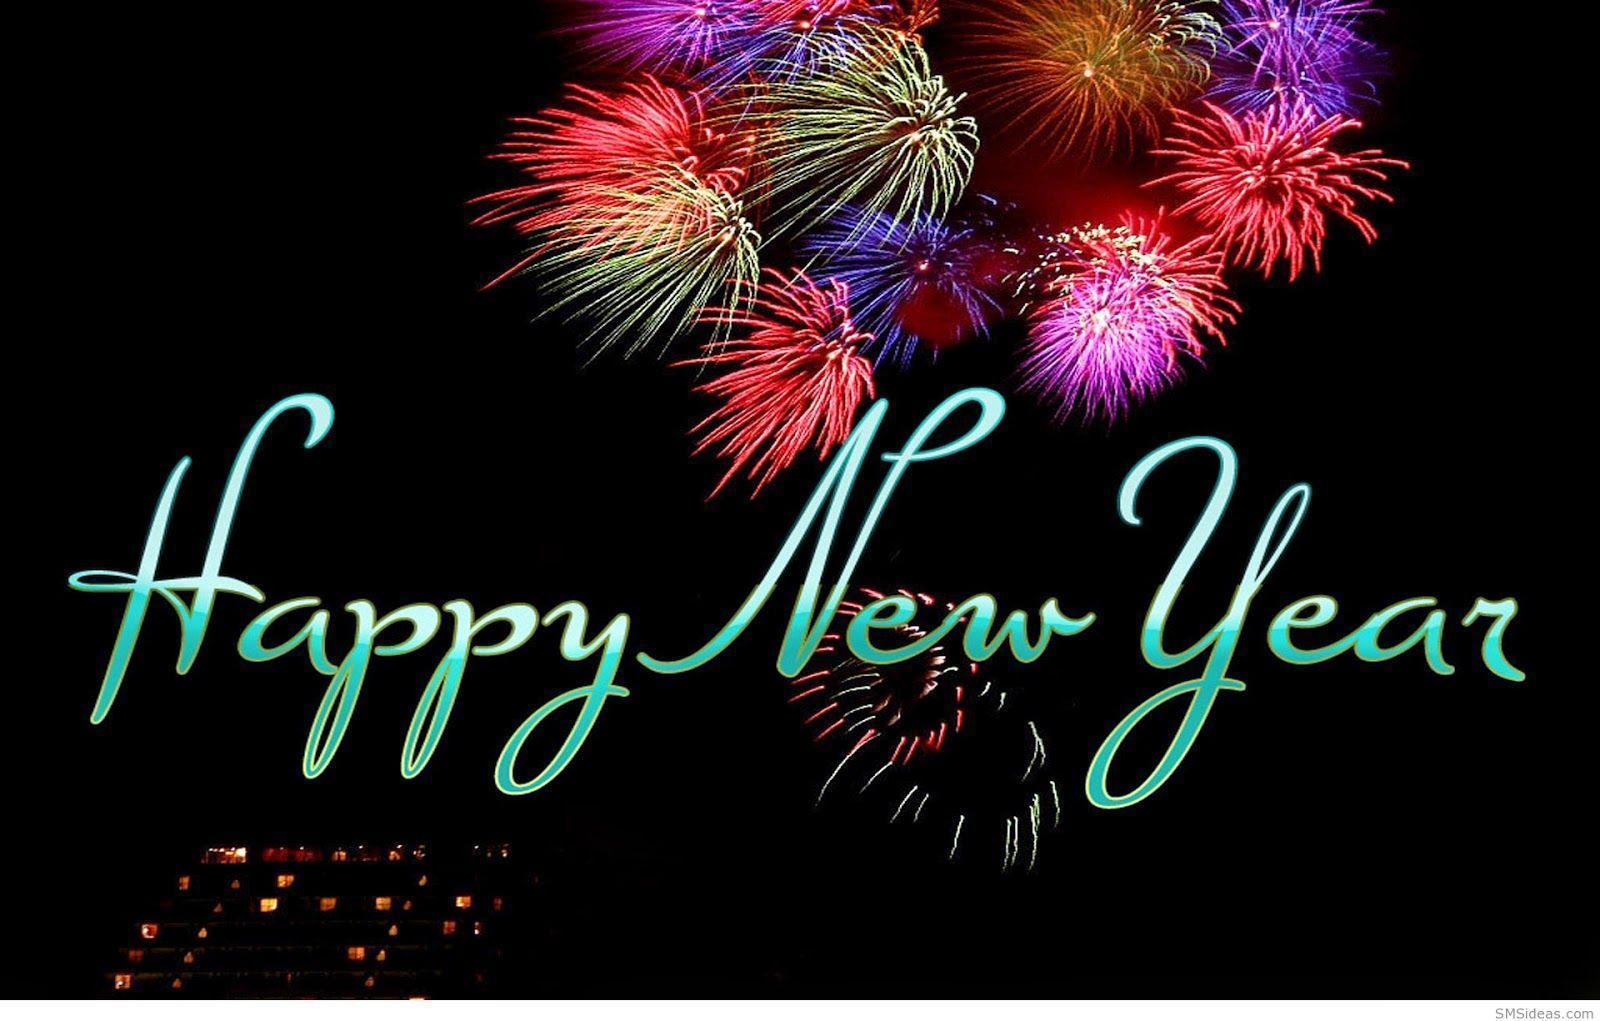 Happy New Year 2016 Greeting & HD Image, Wallpaper {Free Download}